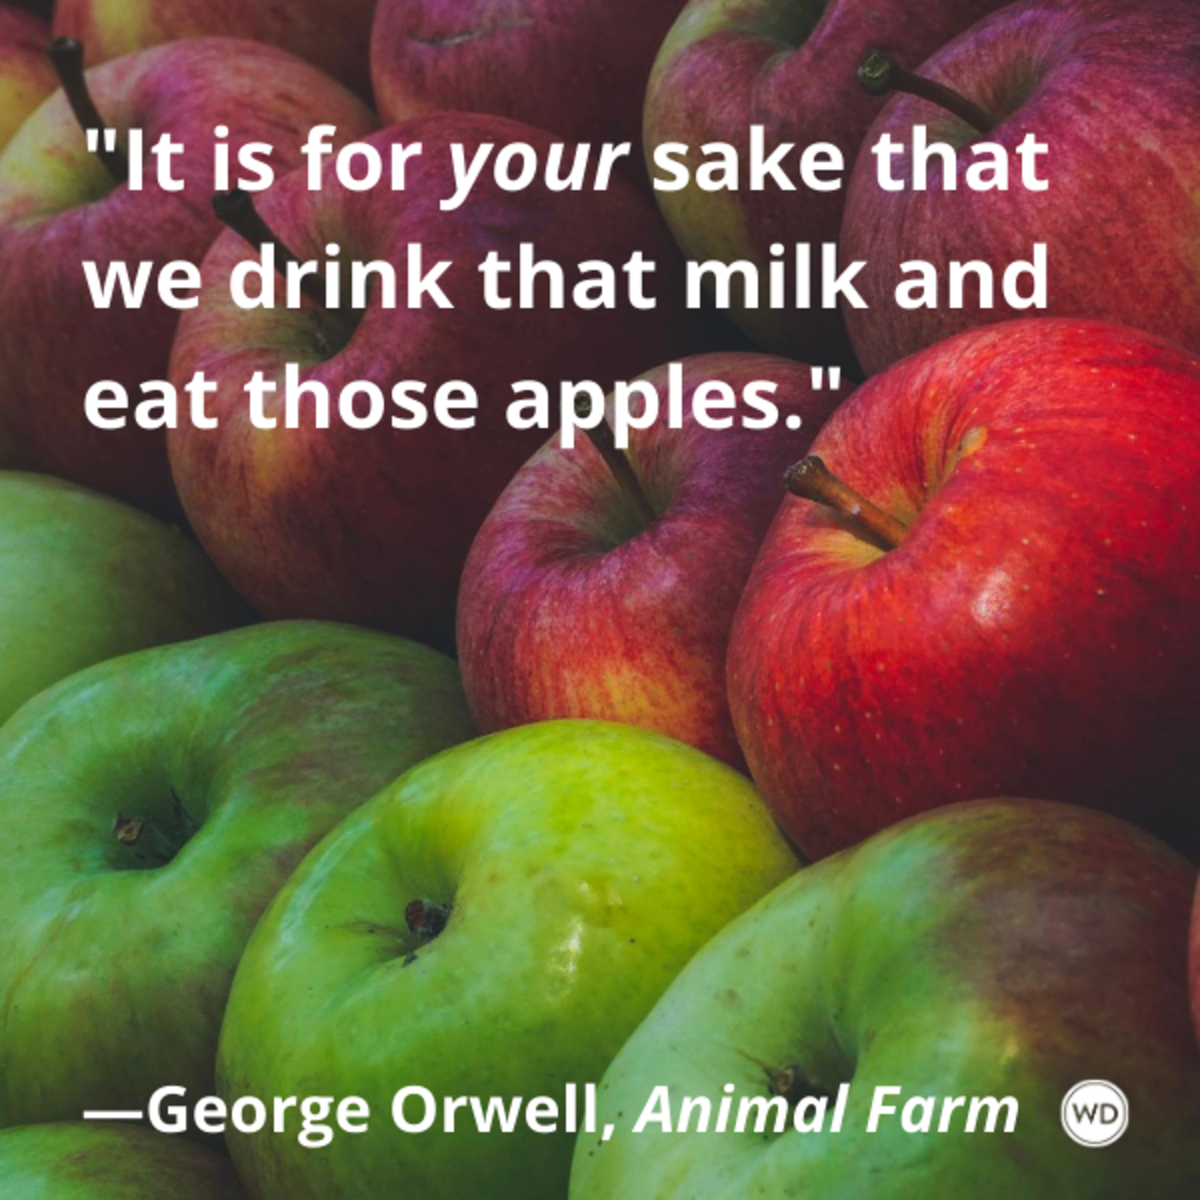 animal_farm_by_george_orwell_quotes_it_is_for_your_sake_that_we_drink_that_milk_and_eat_those_apples